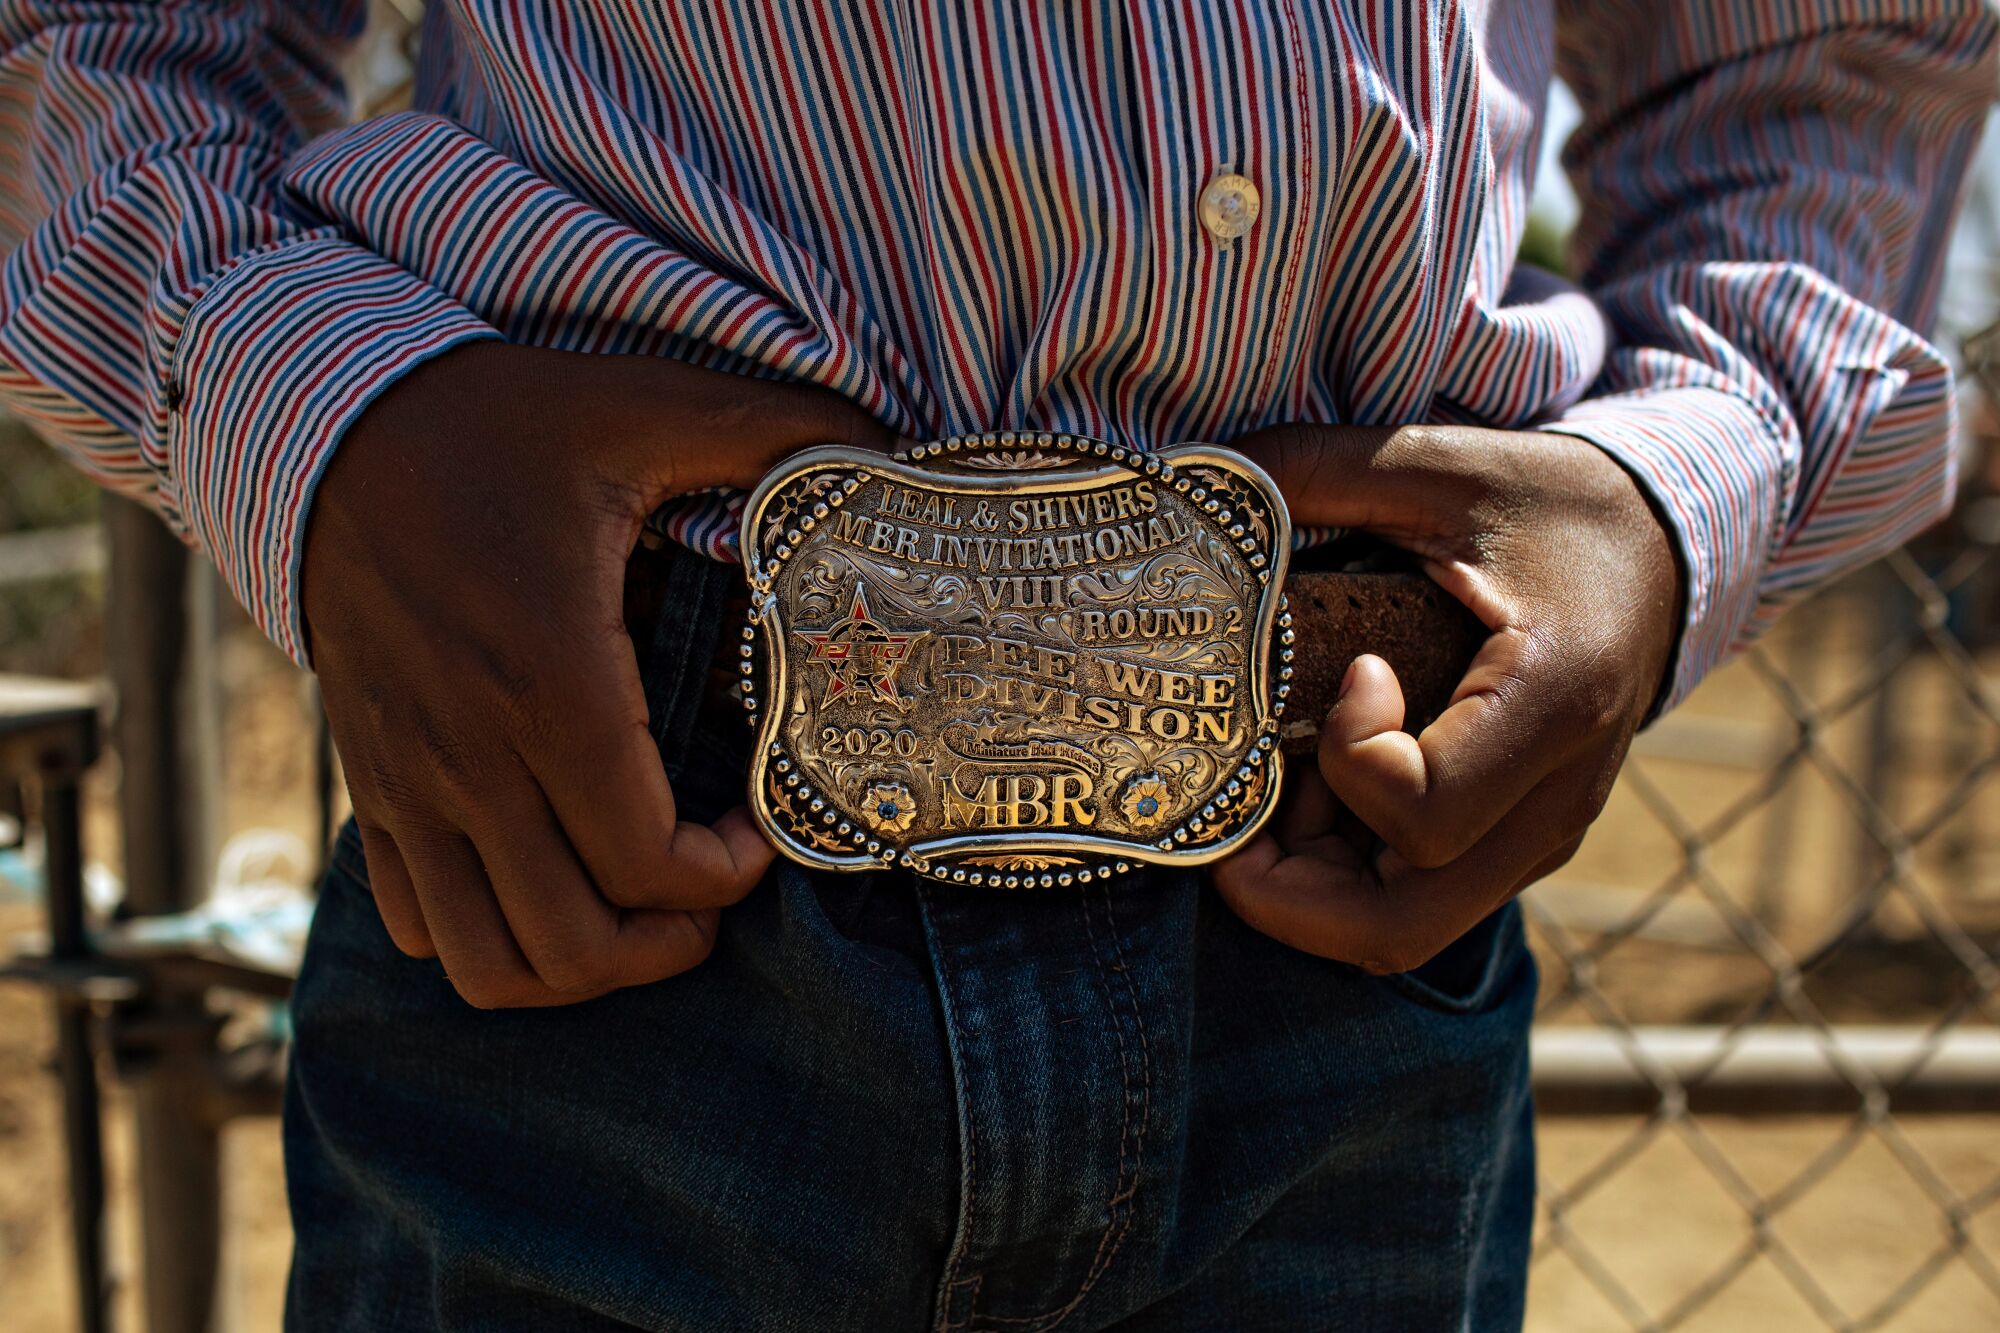 A closeup of a large rodeo championship belt buckle, worn by a boy in jeans and a striped shirt and framed by his hands